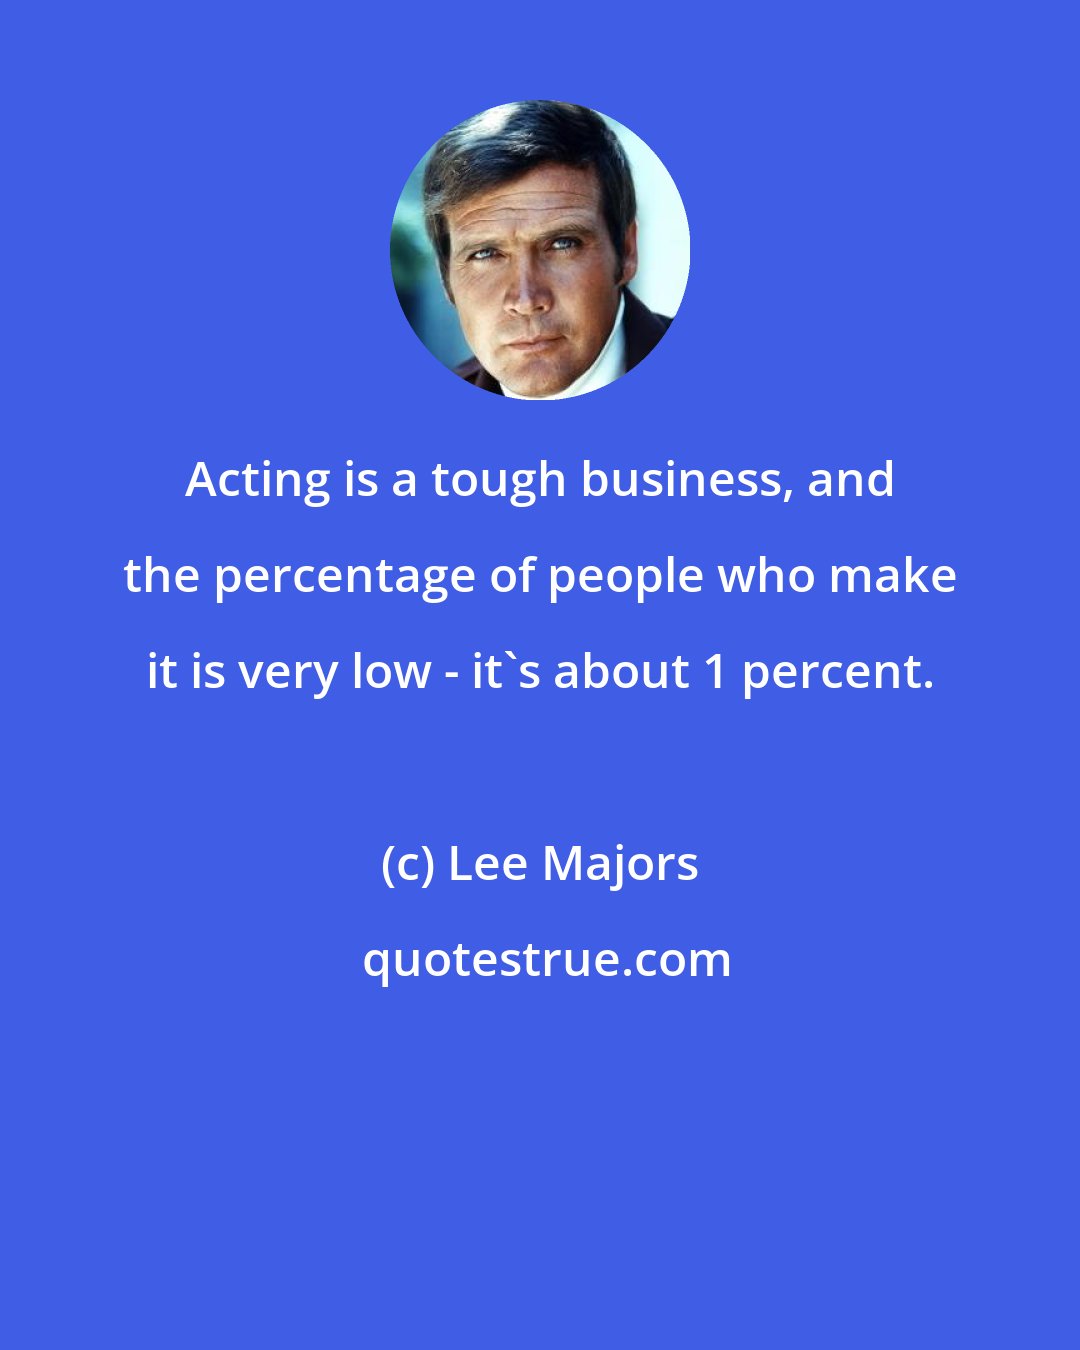 Lee Majors: Acting is a tough business, and the percentage of people who make it is very low - it's about 1 percent.